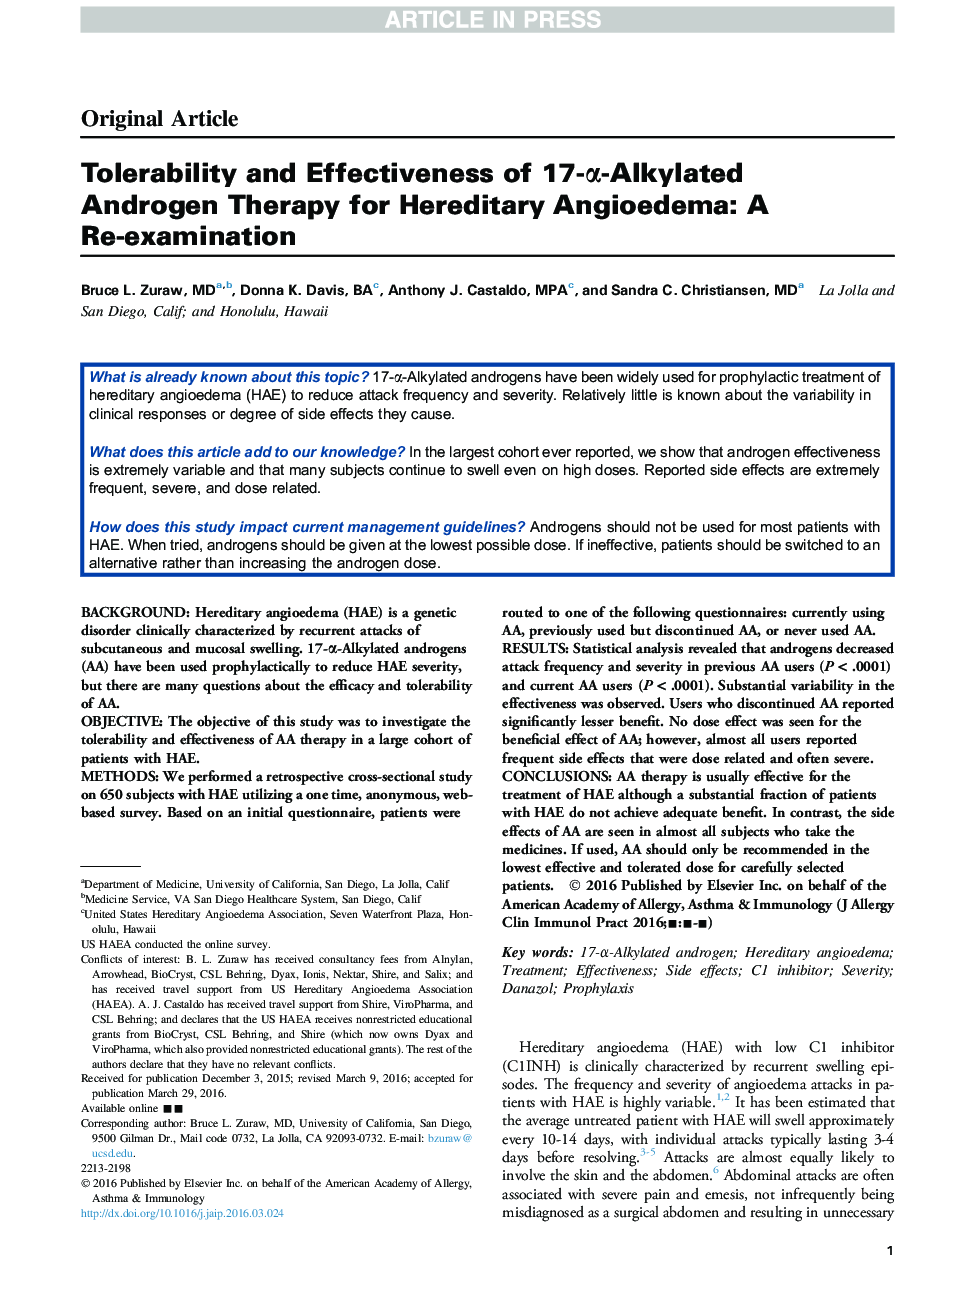 Tolerability and Effectiveness of 17-Î±-Alkylated Androgen Therapy for Hereditary Angioedema: A Re-examination